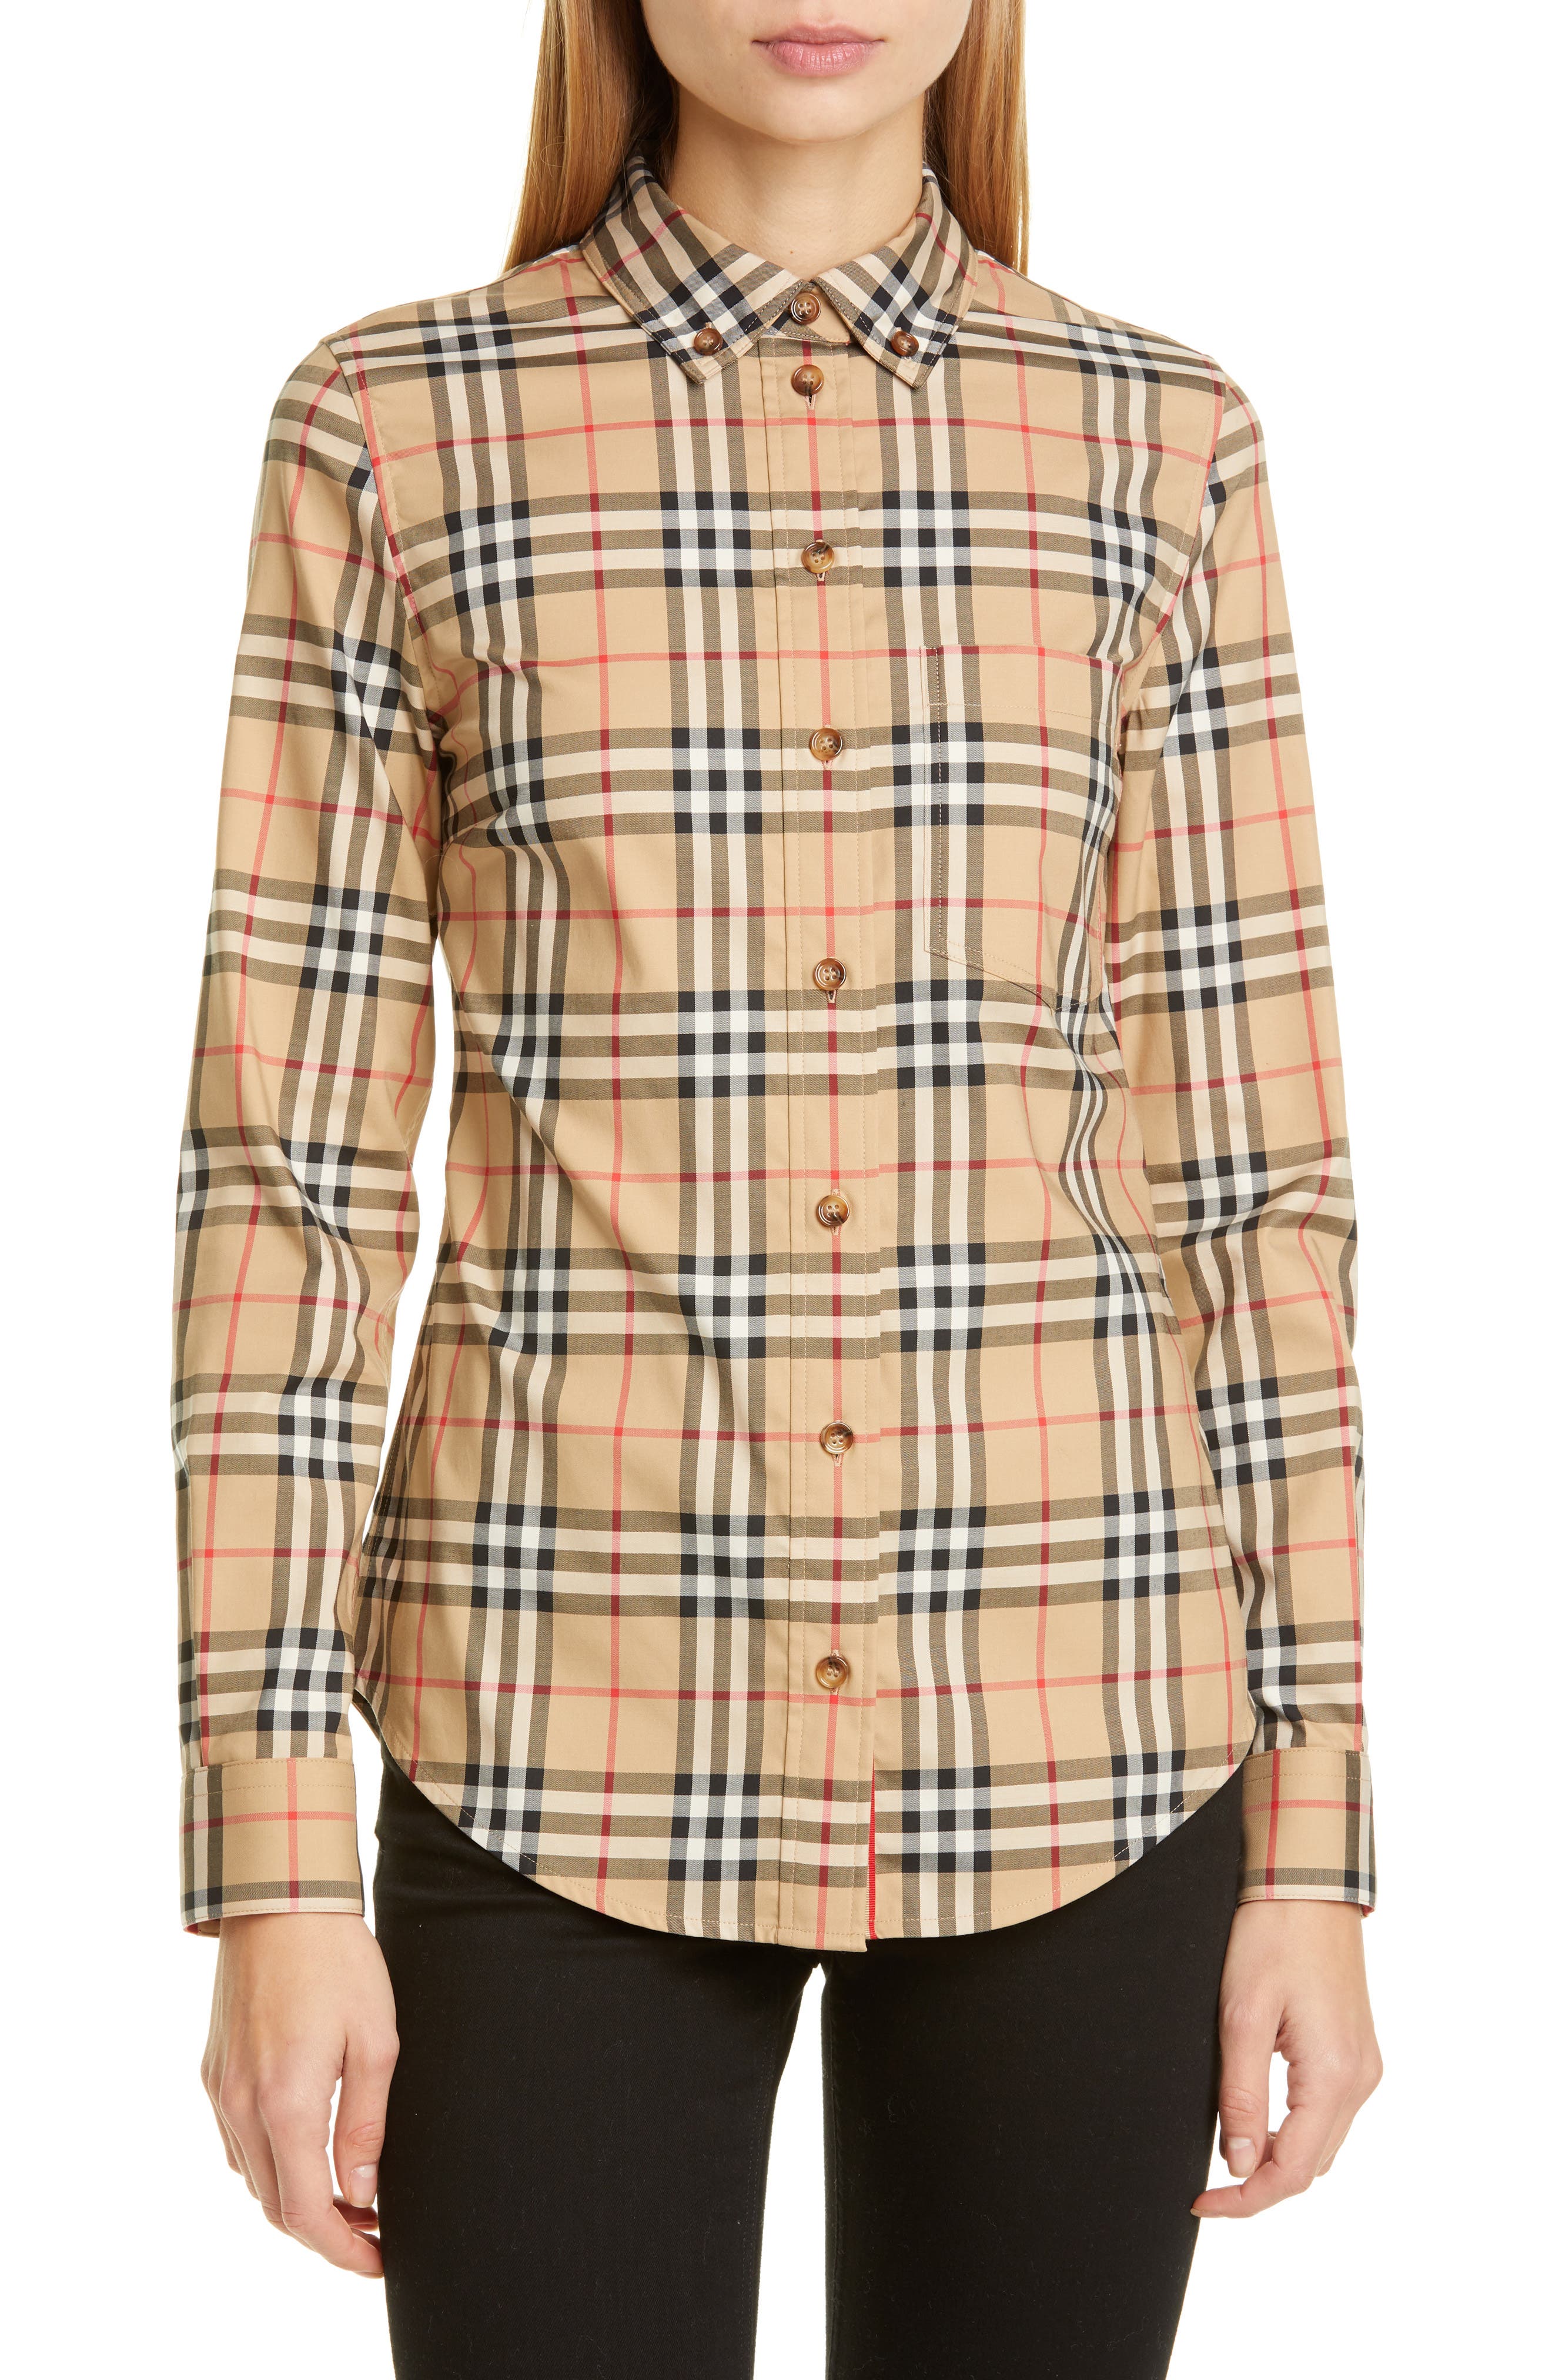 Burberry Lapwing Vintage Check Stretch Cotton Shirt in Archive Beige Ip Chk at Nordstrom, Size 4